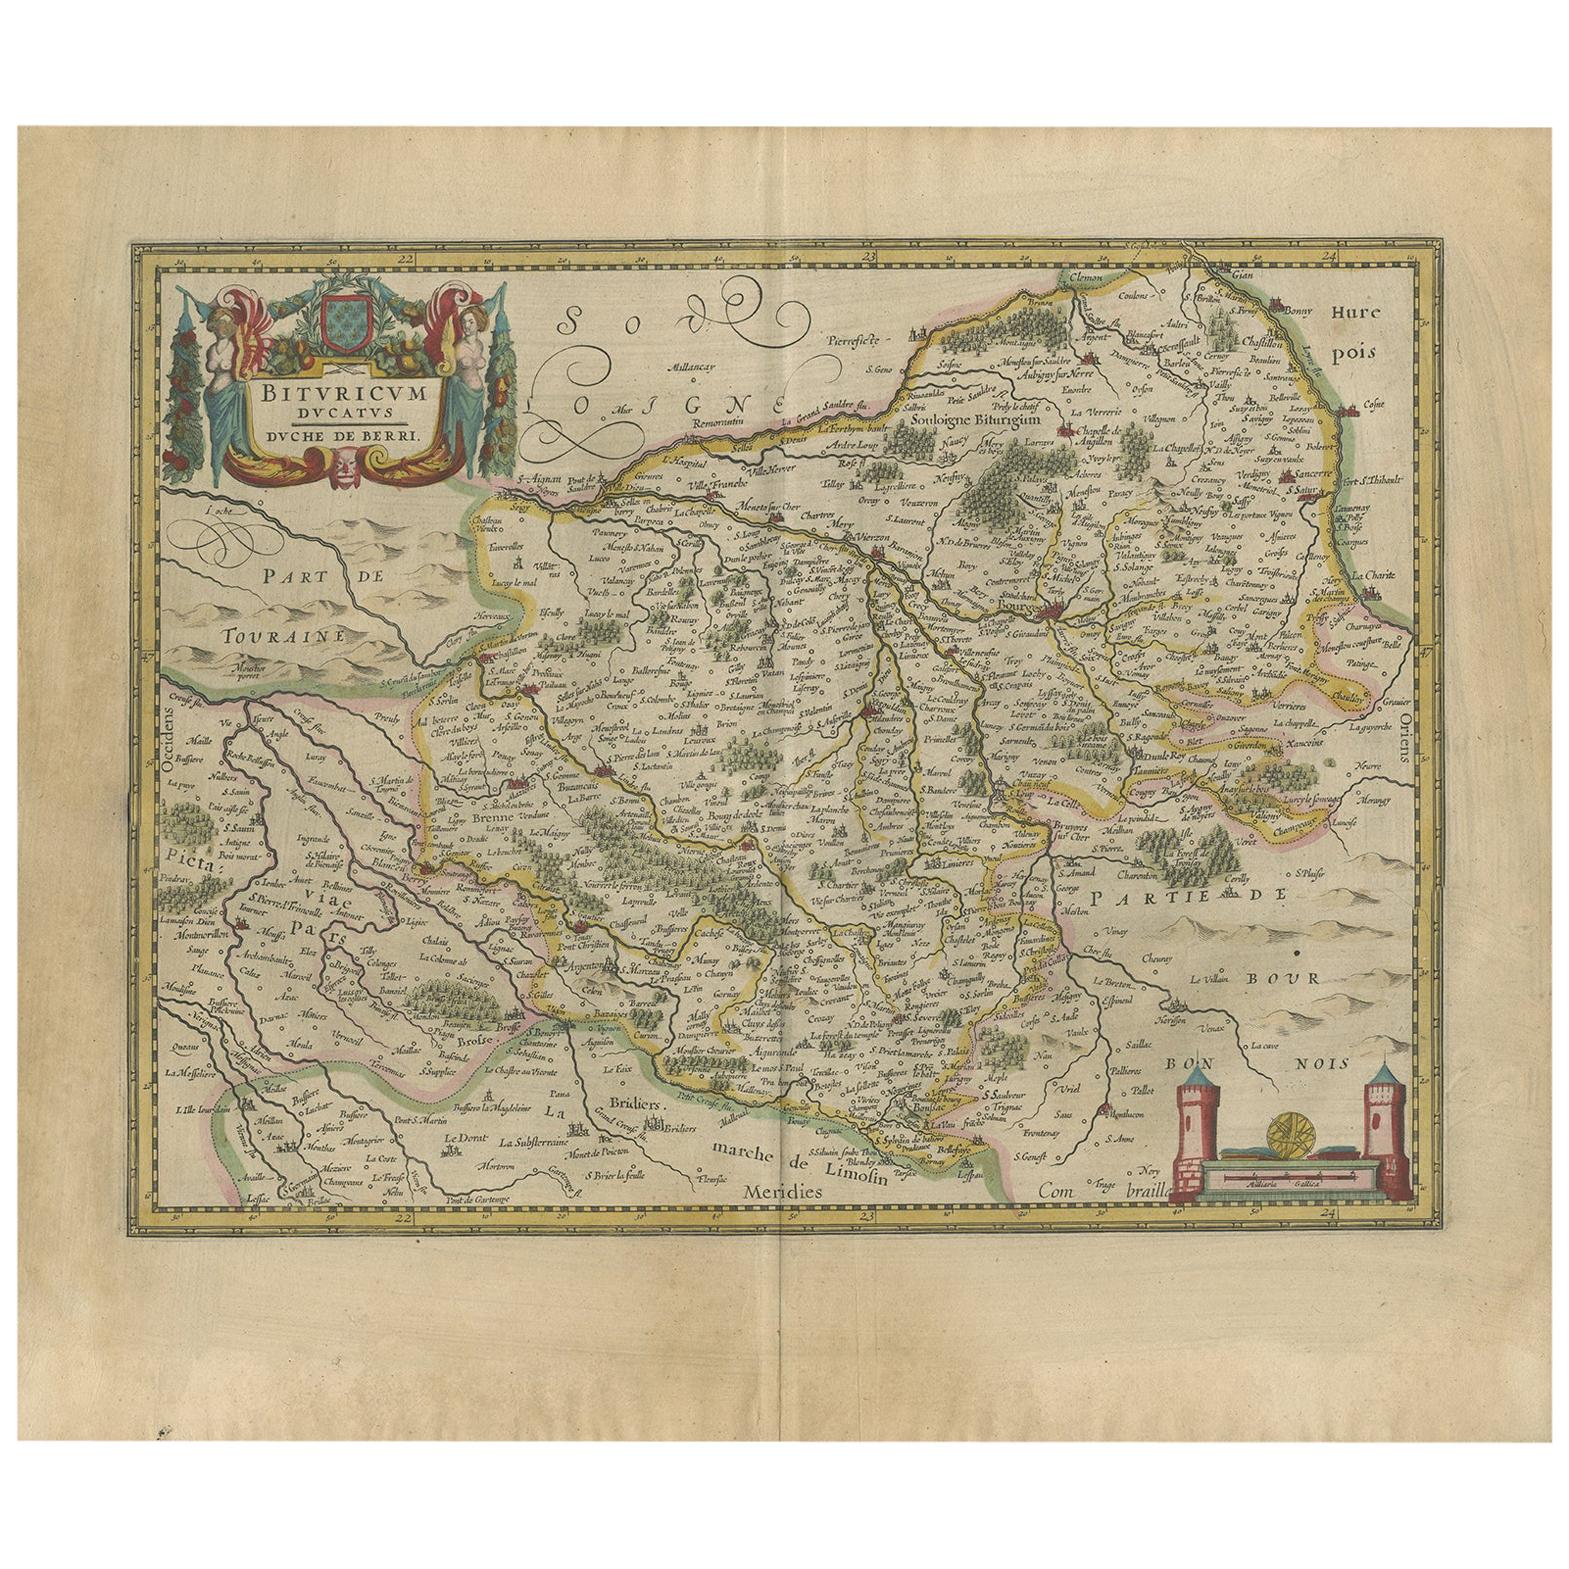 Antique Map of the Berry Region of France, circa 1670